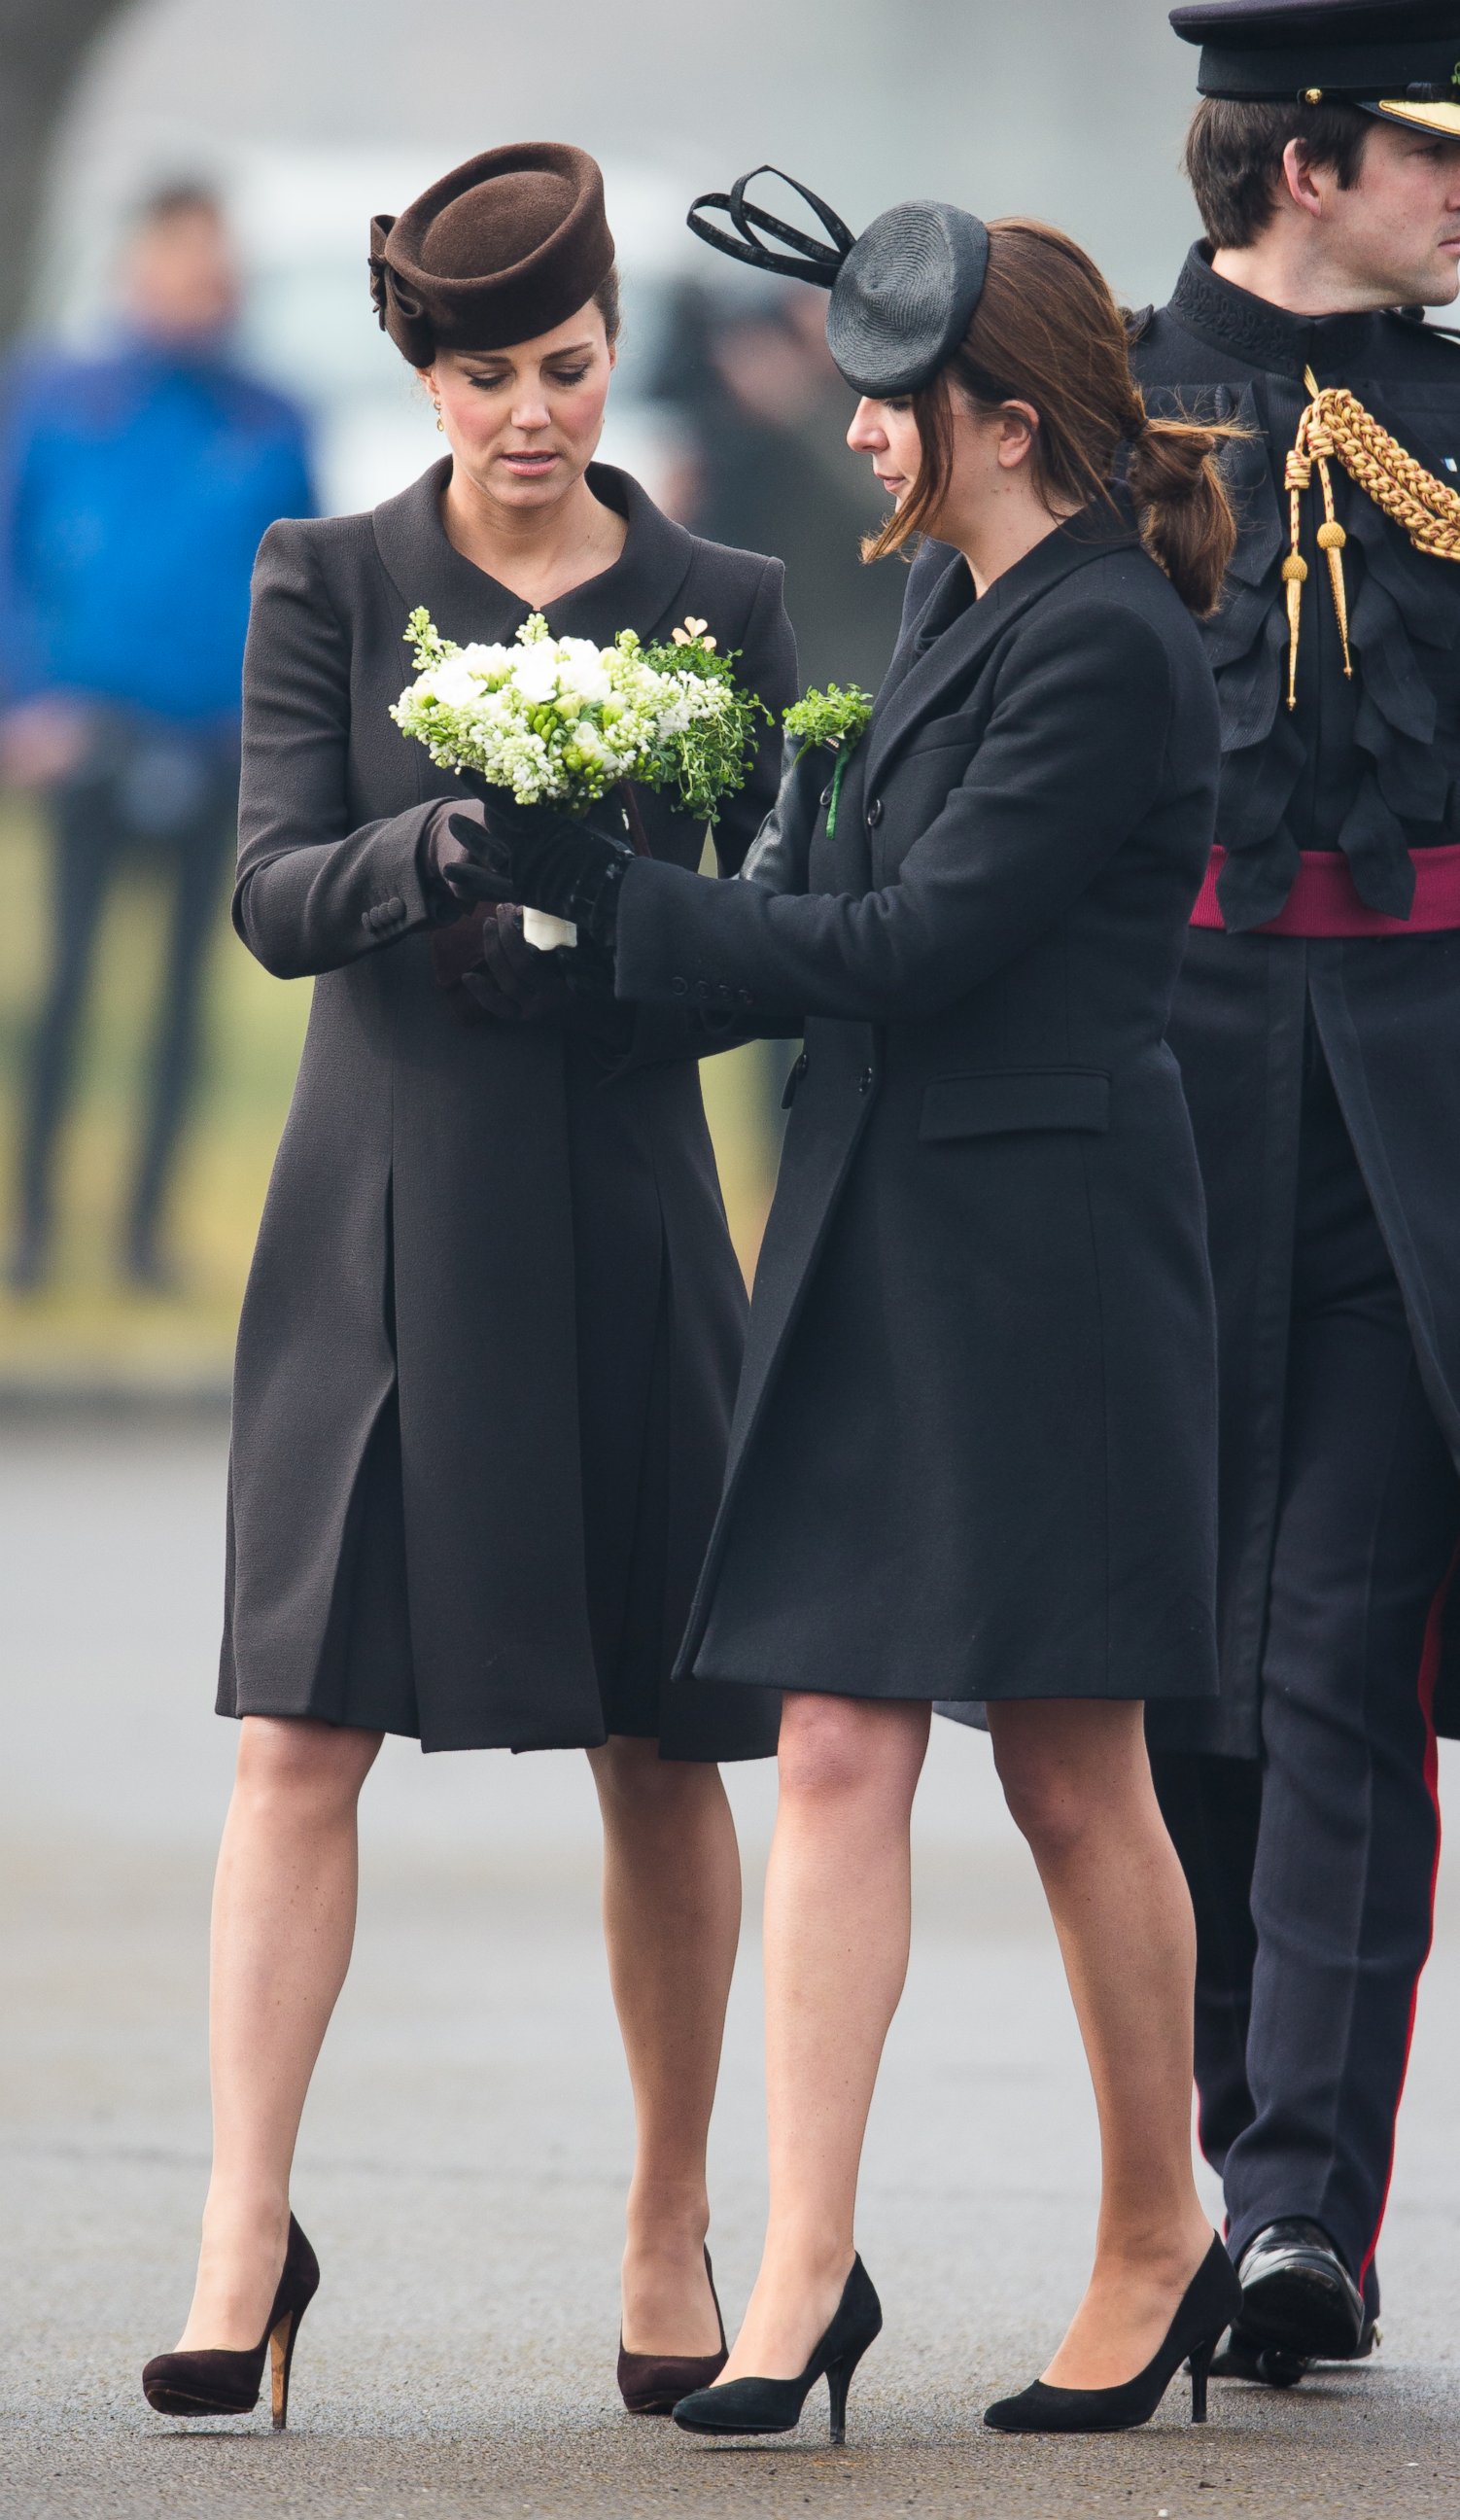 PHOTO: Catherine, Duchess of Cambridge Rebecca Deacon, right, attend the St Patrick's Day Parade at Mons Barracks, March 17, 2015 in Aldershot, England.